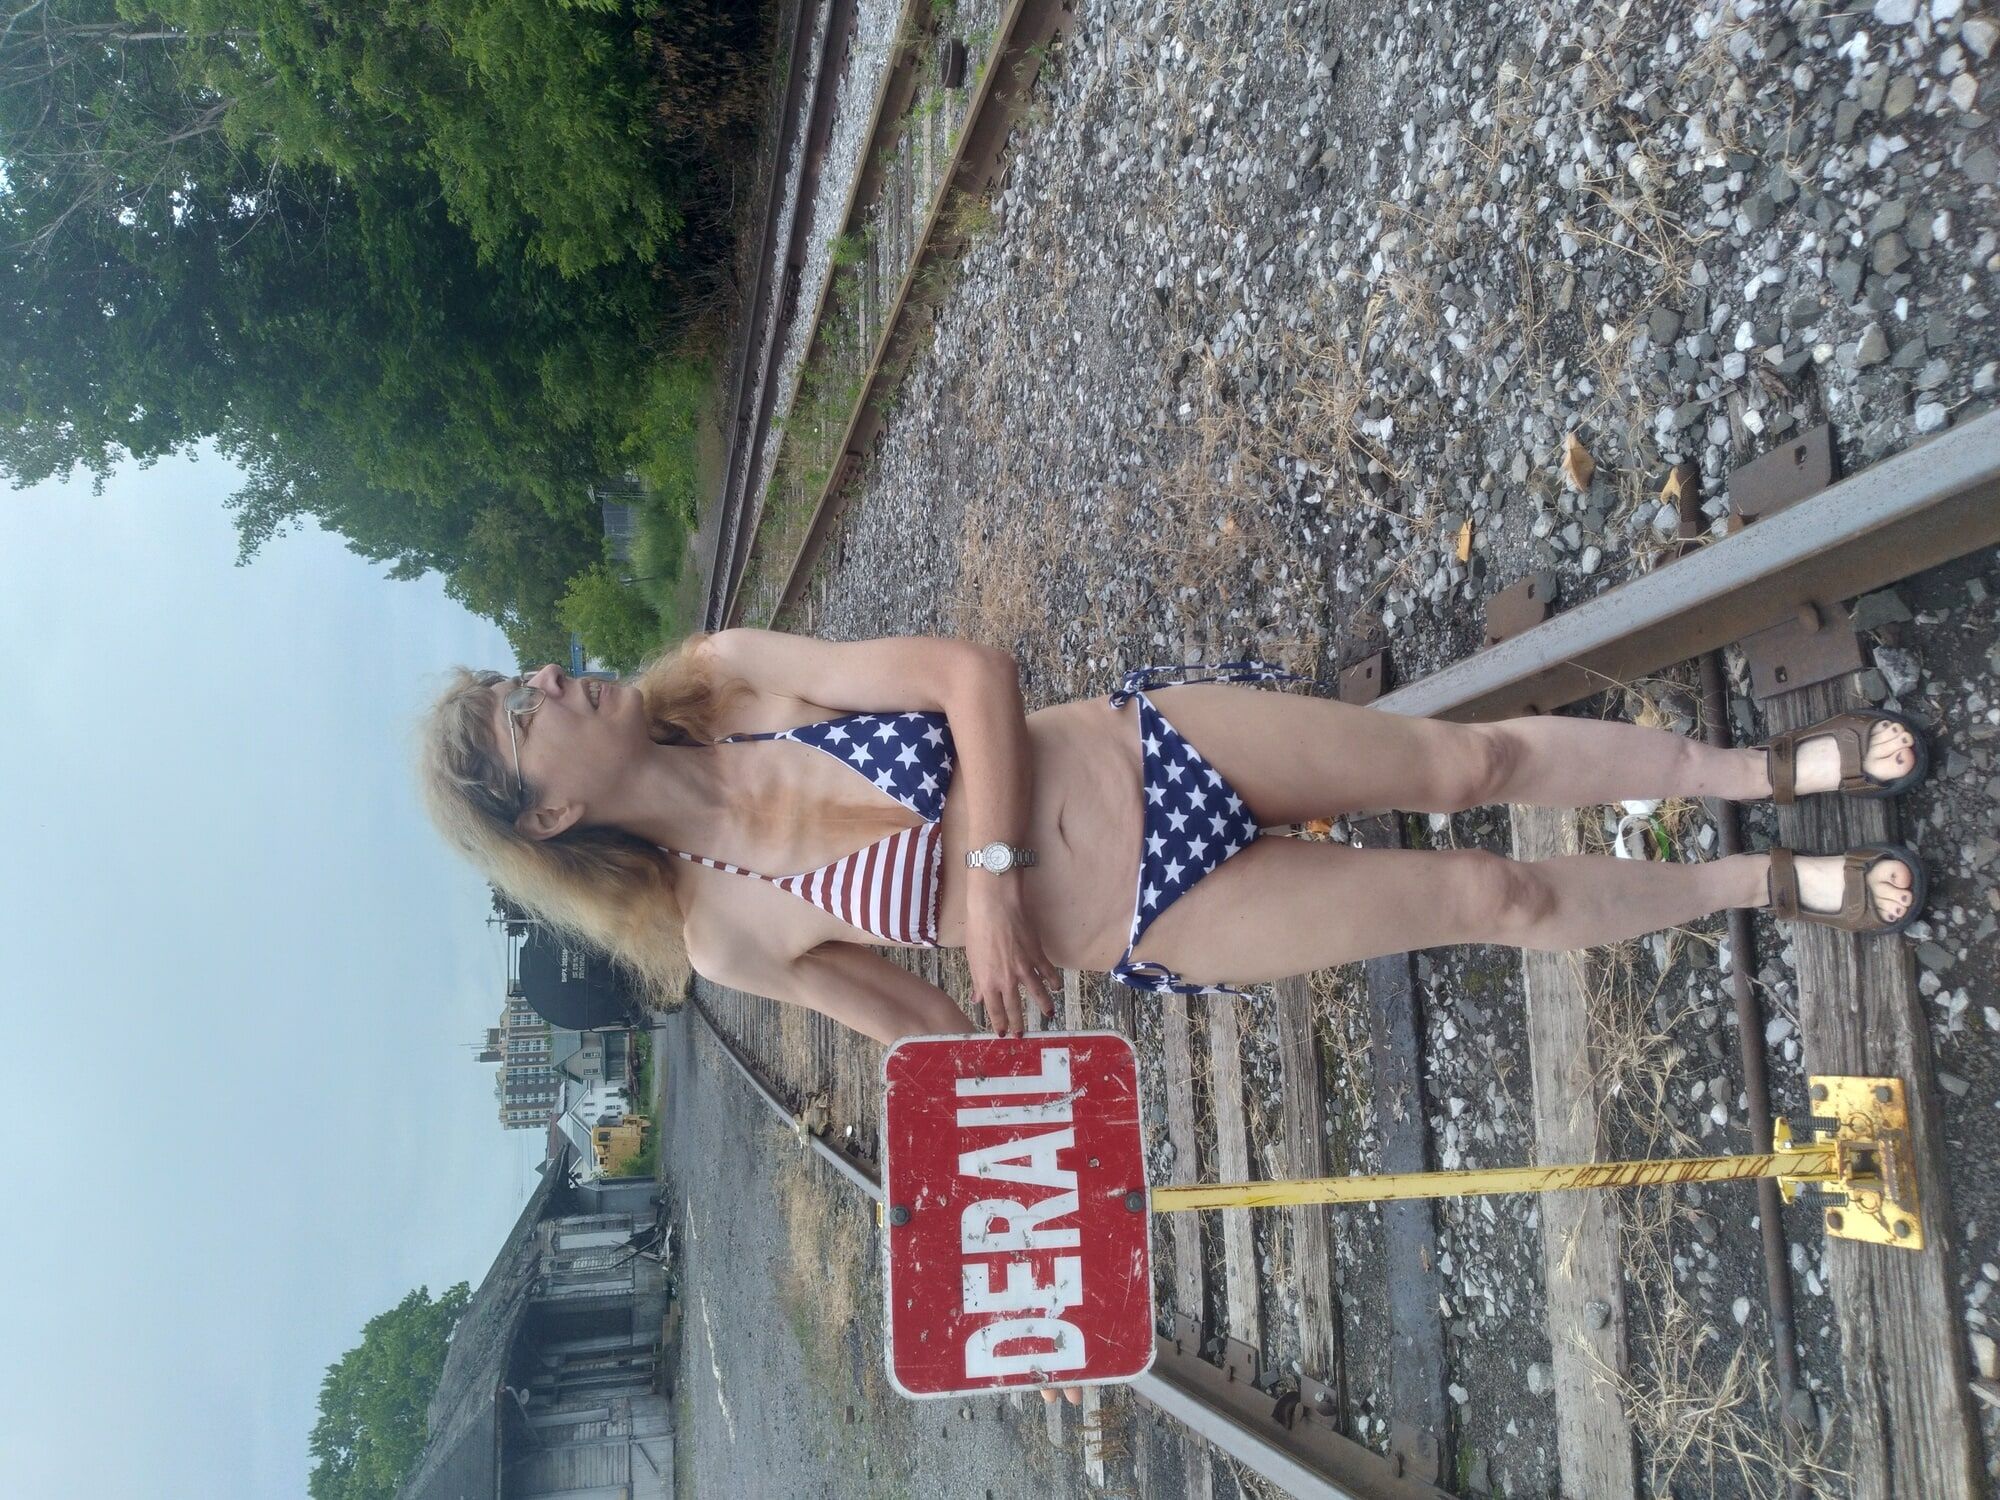 American Train. July 4th release. My best photo set to date. #44